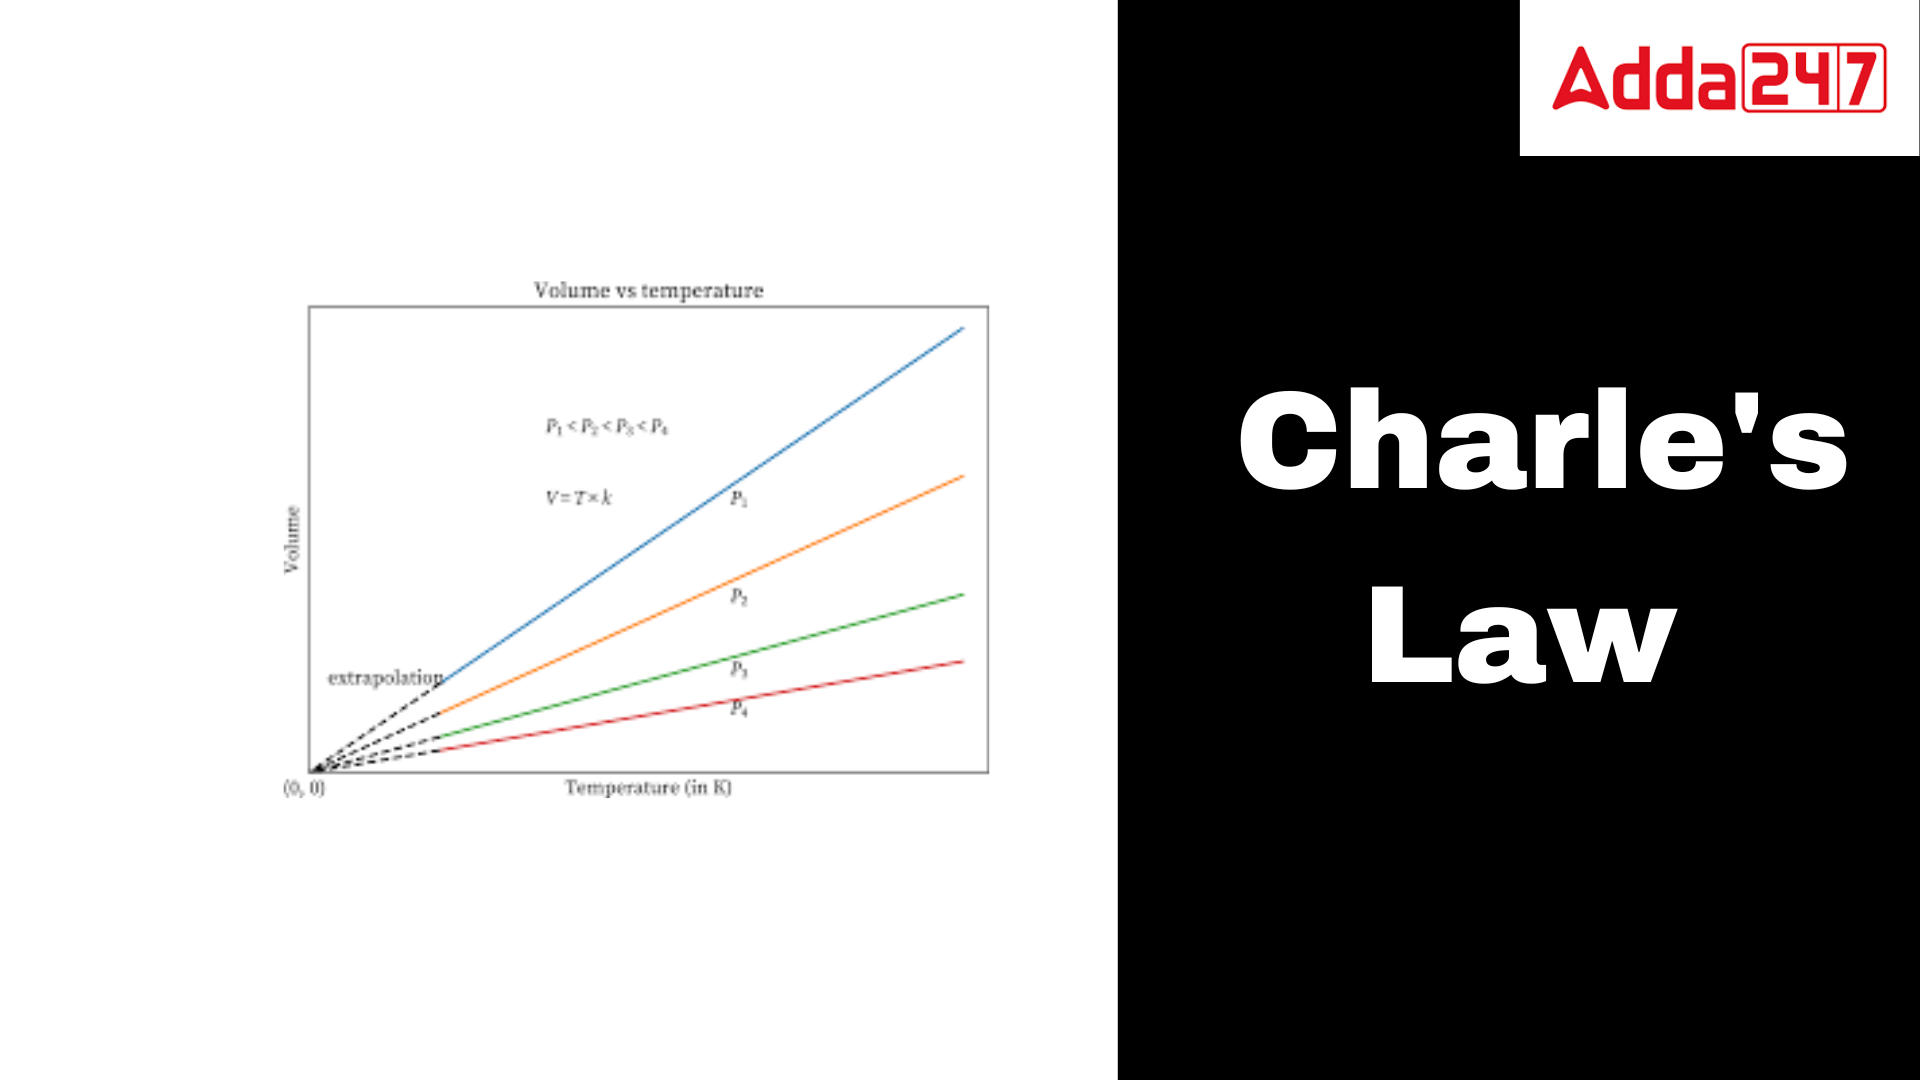 Charle's law